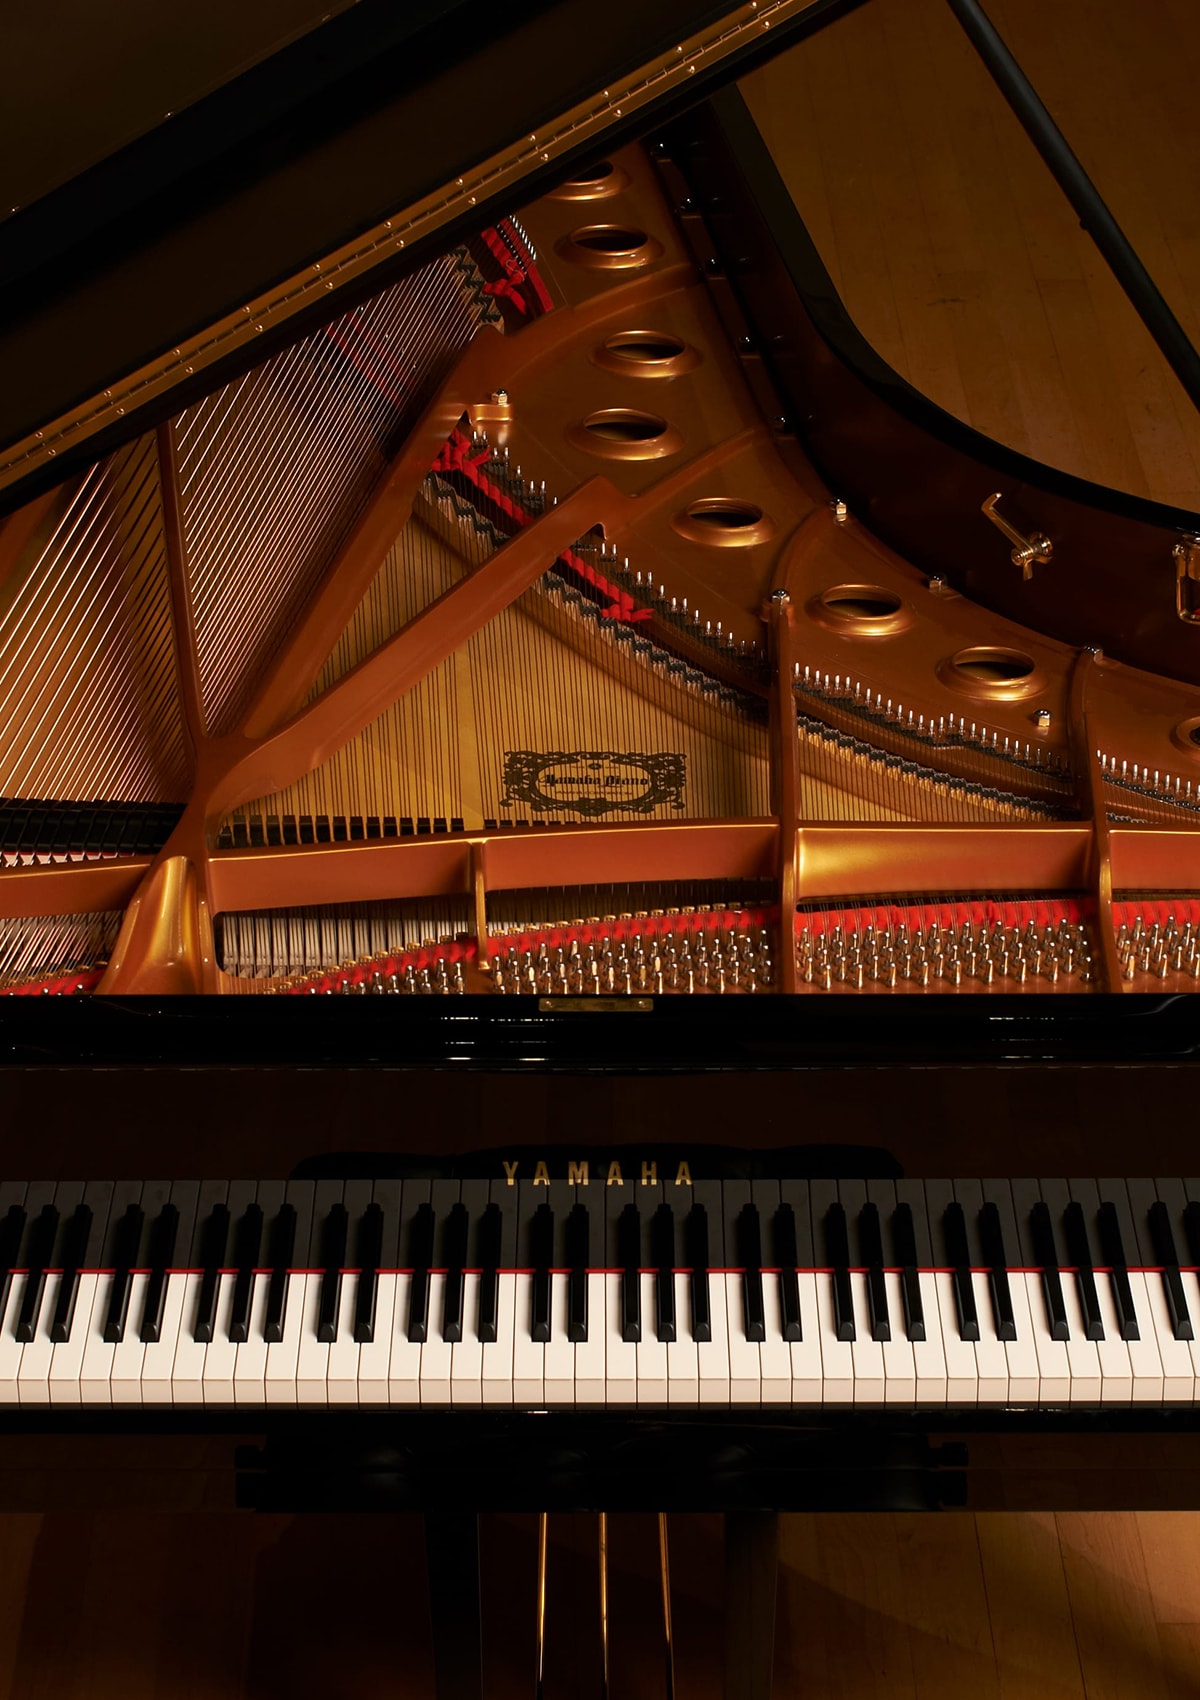 Buy Acoustic Pianos, Pianos Online at Best Prices India